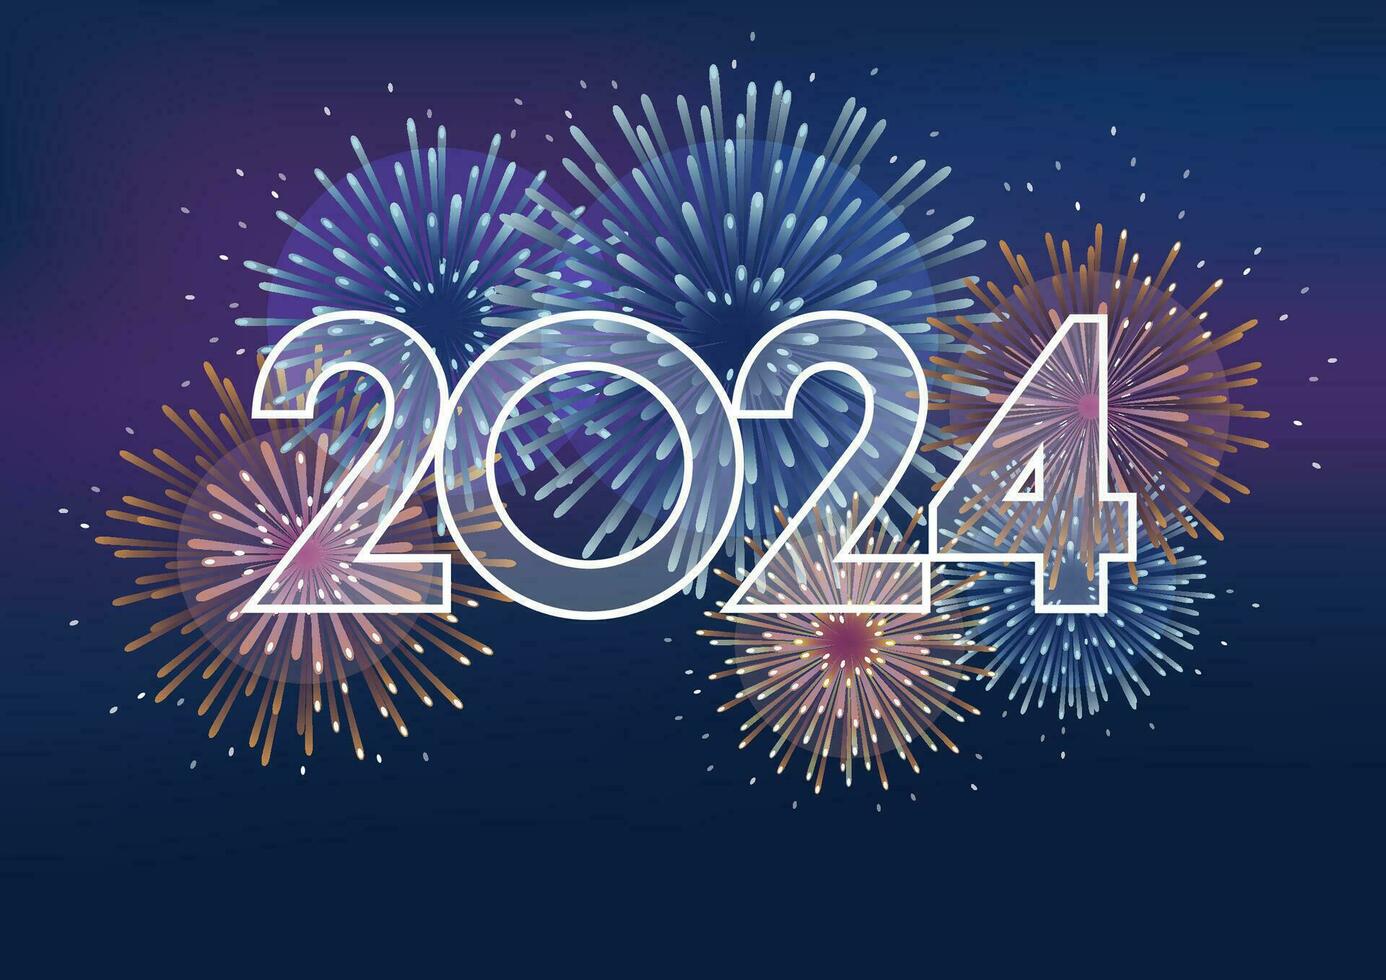 The Year 2024 Logo And Fireworks On A Dark Background Illustration Celebrating The New Year Free Vector 